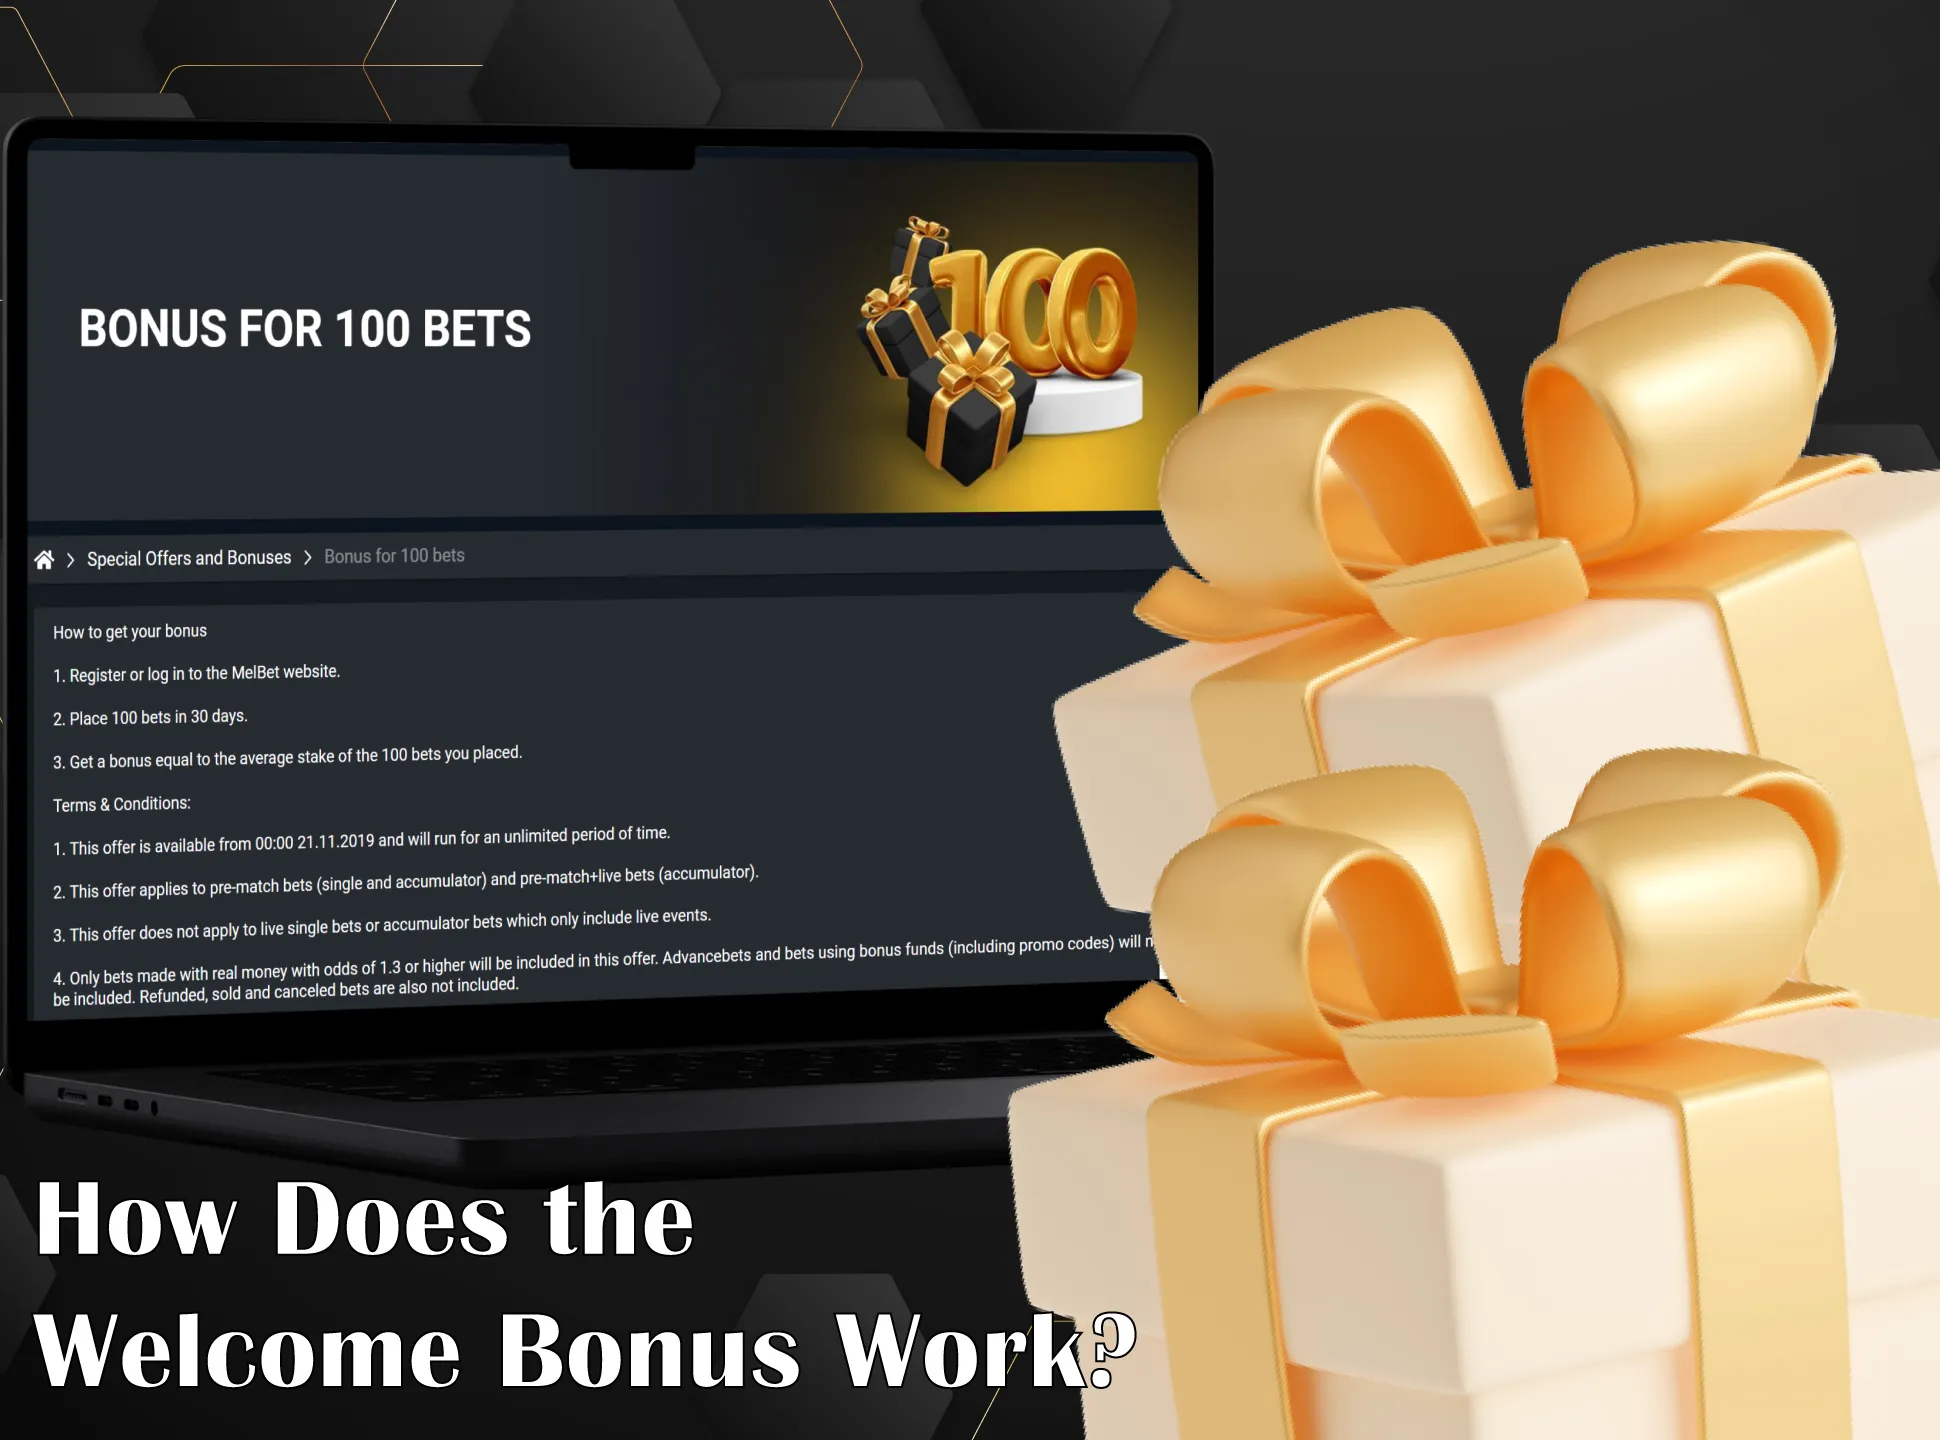 You receive your welcome bonus after the registration and the first deposit on the betting site.